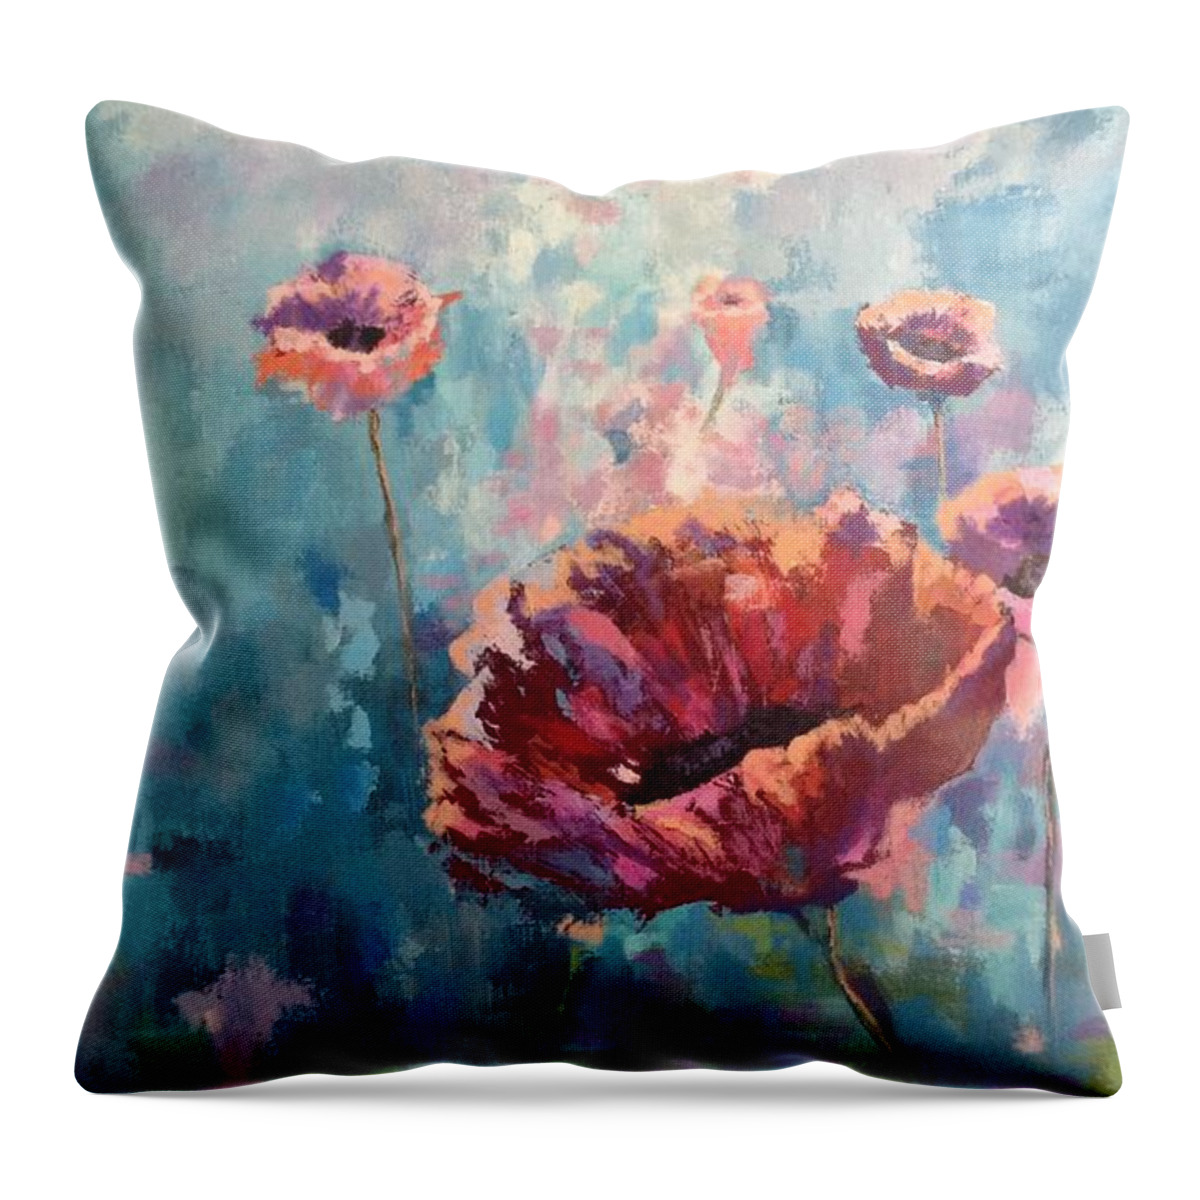 Abstract Flower Throw Pillow featuring the painting Abstract Poppy by Kathy Laughlin